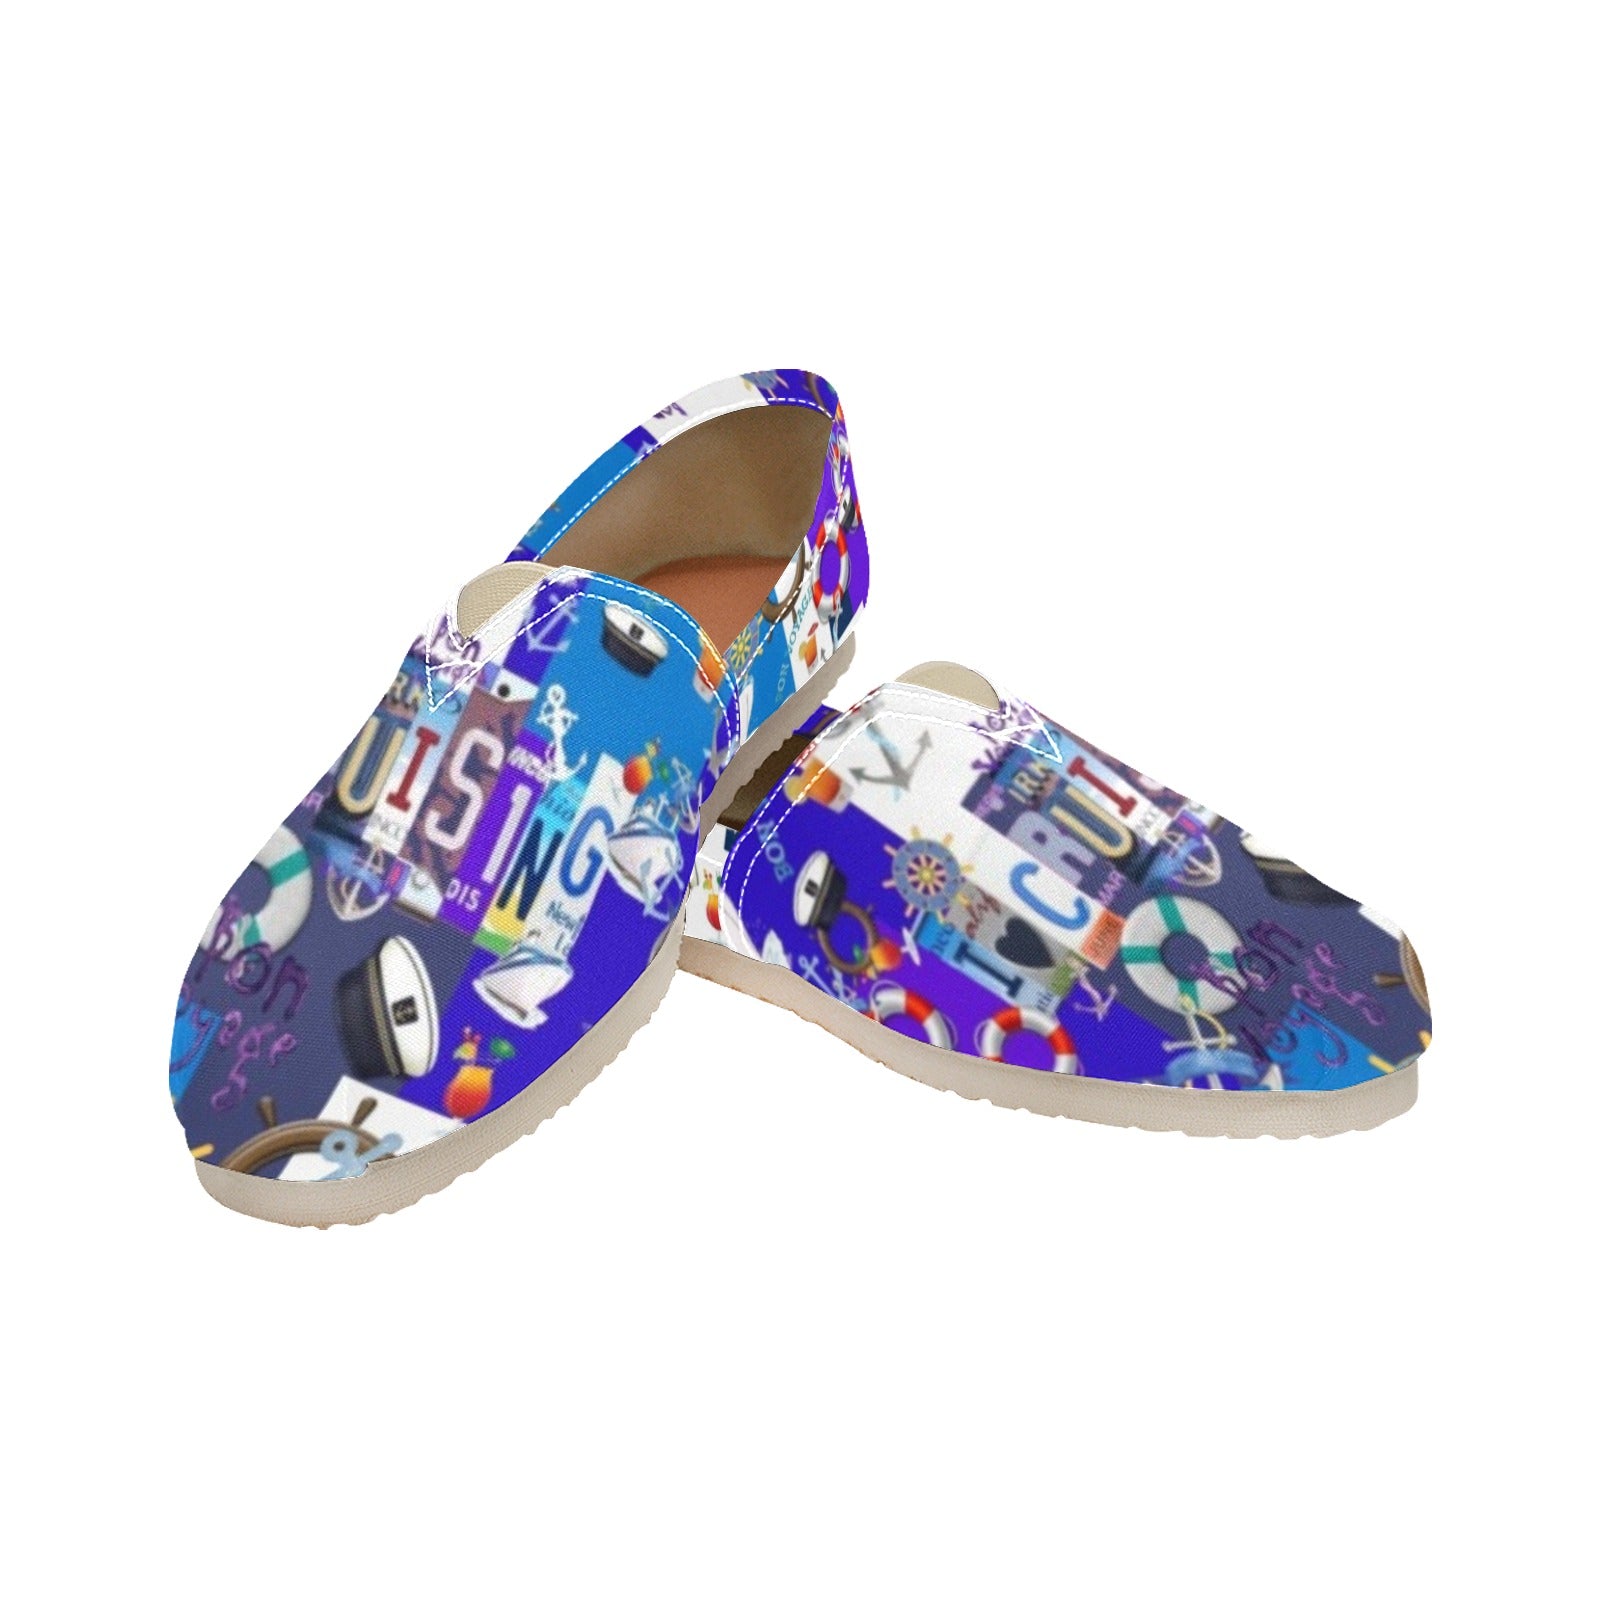 Cruise - Casual Canvas Slip-on Shoes